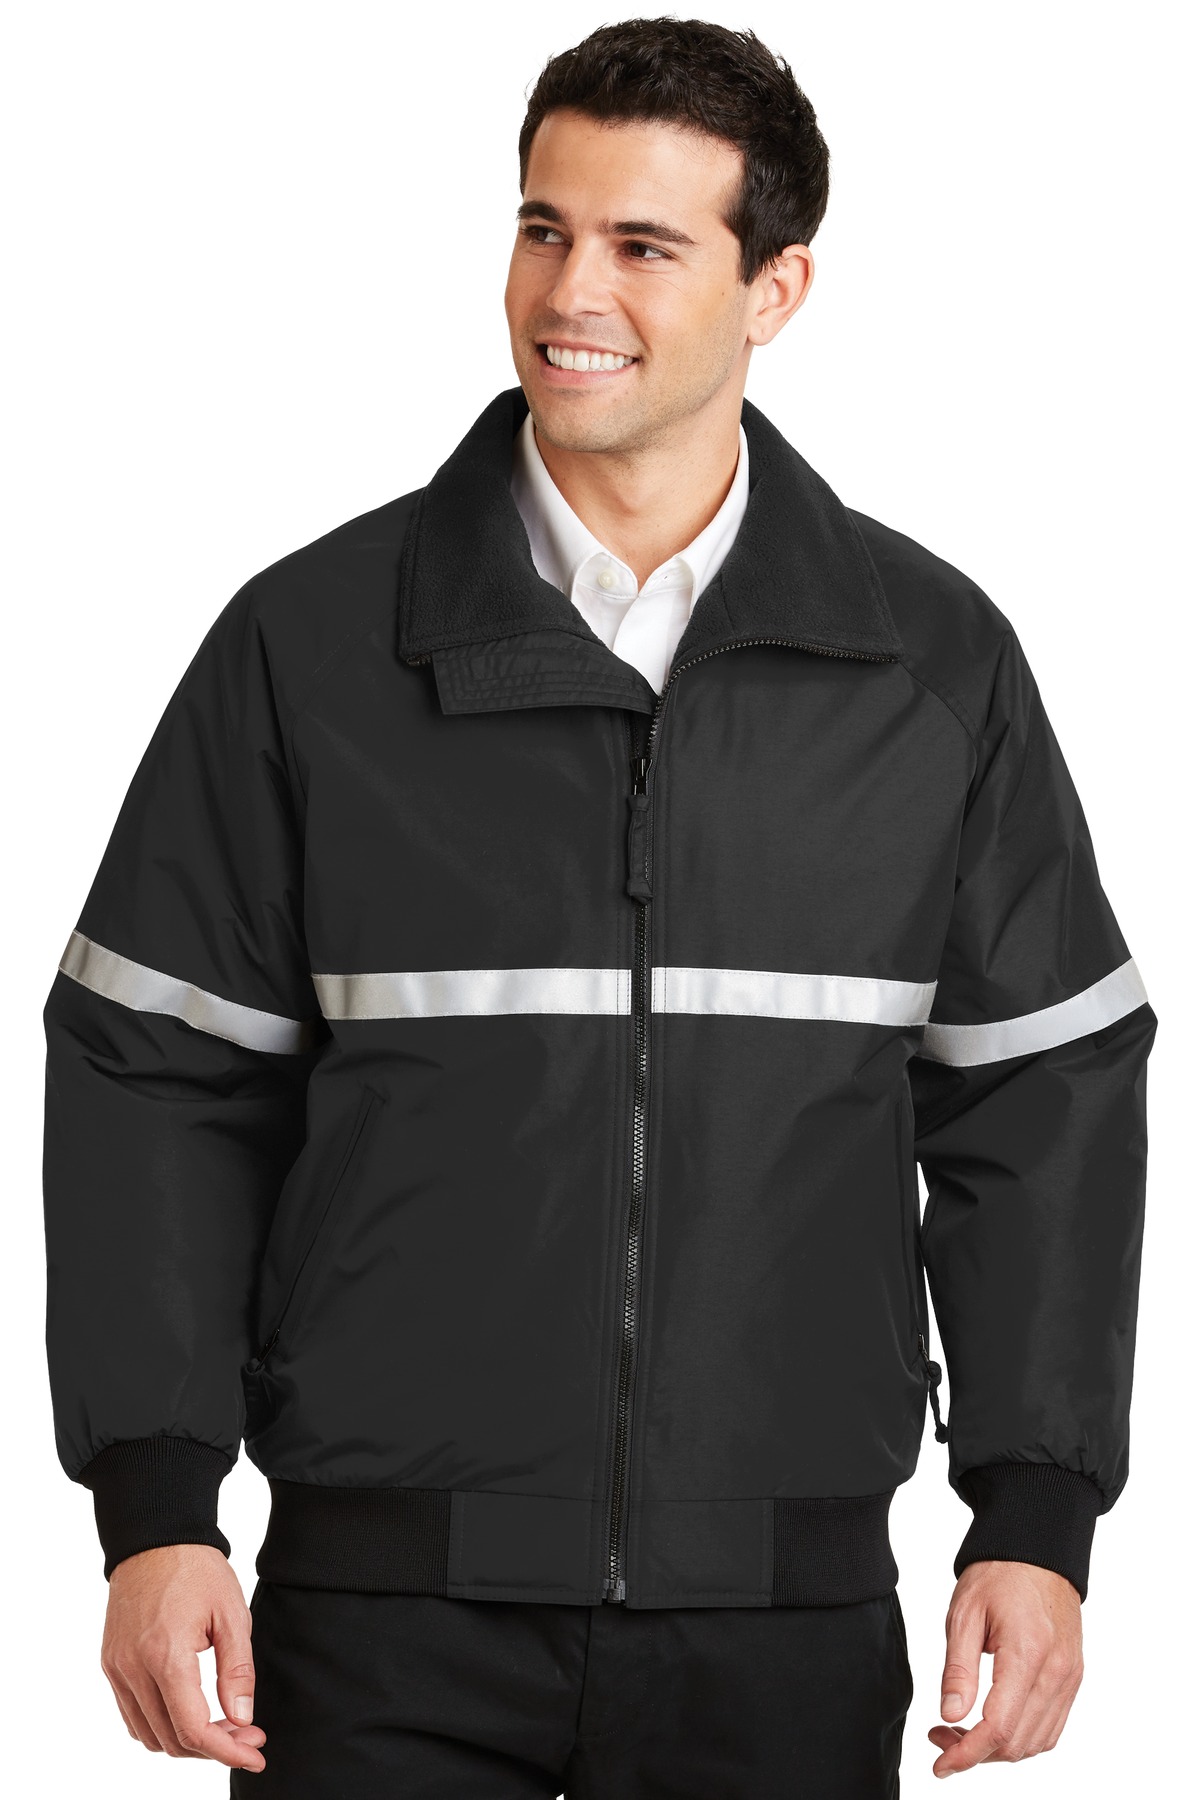 Port Authority Hospitality Outerwear ® Challenger Jacket with Reflective Taping.-Port Authority